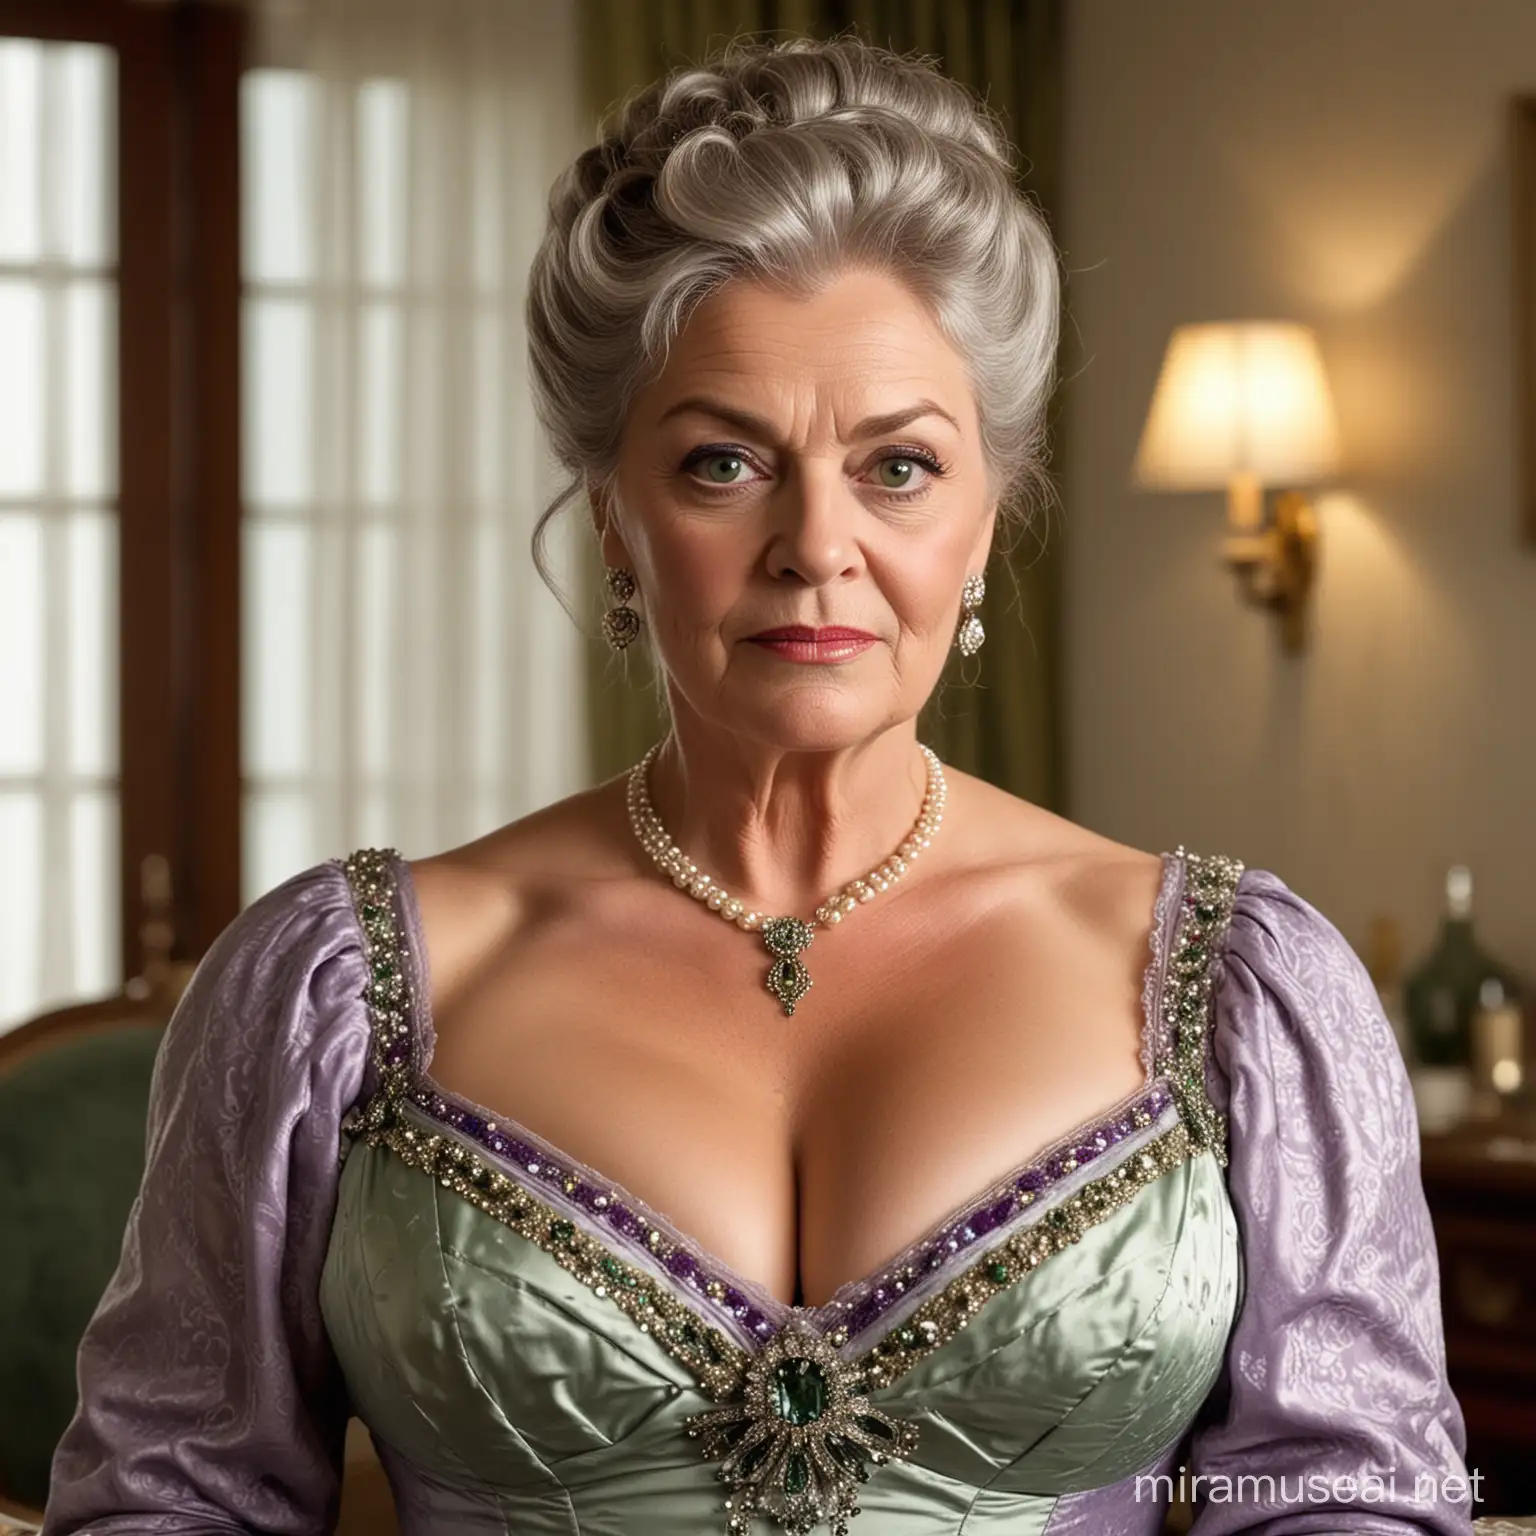 Aunt is an elderly old fashioned lady: She is the strict owner of the boardinghouse, a broad big Madame. 

She is voluptuous with warmth and her cleavage reveals her full bosom. Her hair is grey and purple and she has stern green eyes.

Here she is dressed in an elegant gown for dinner in a bourgeois style. 
